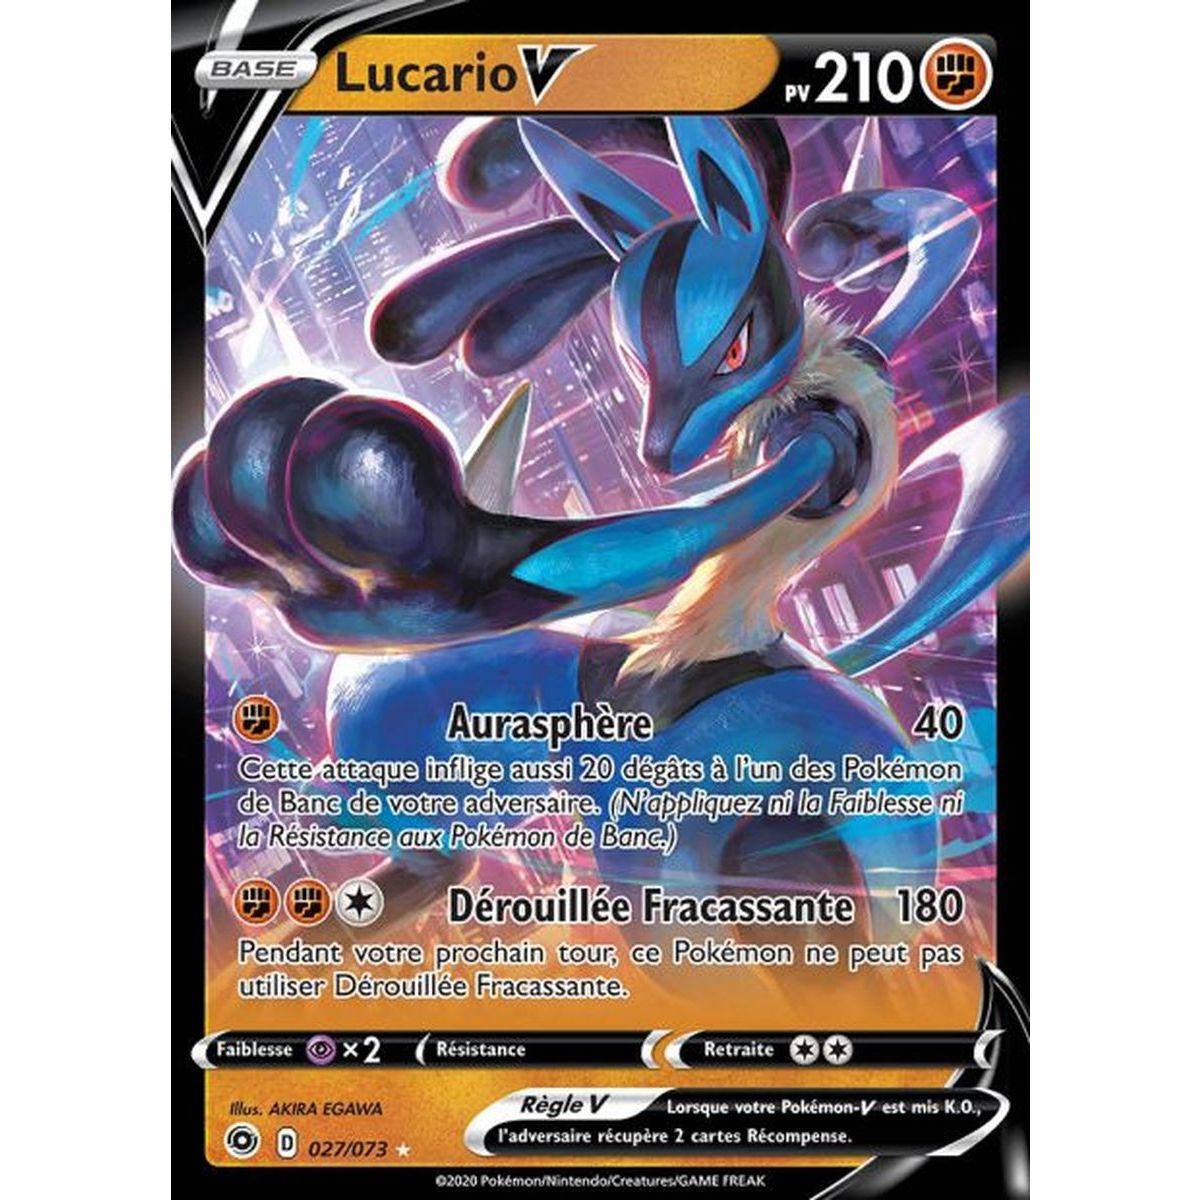 Lucario V - Ultra Rare 27/73 EB3. Sword and Shield 3.5: The Way of the Master